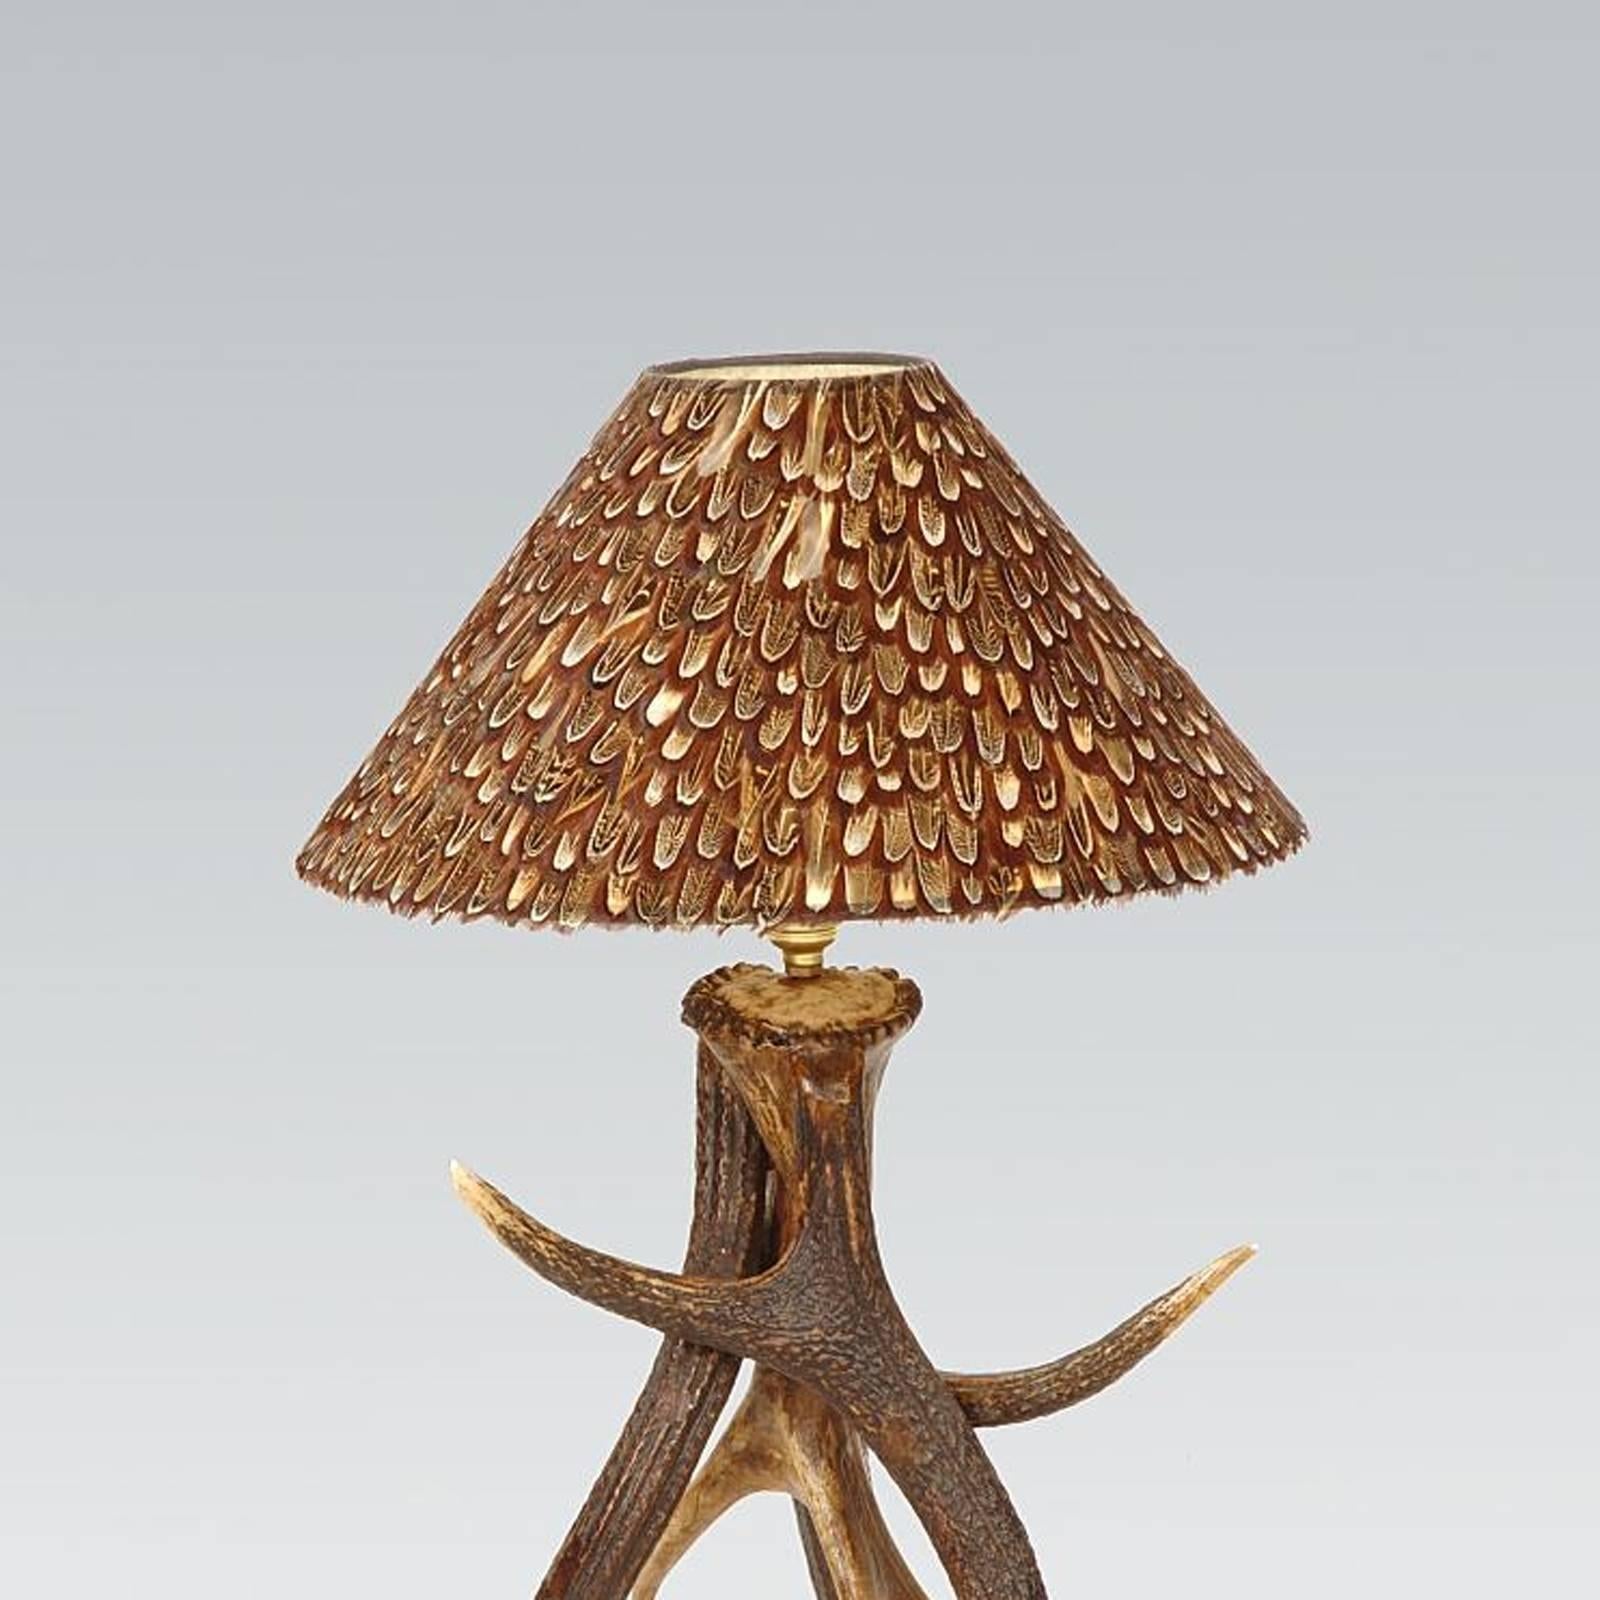 Scottish Three Antlers Table Lamp with Partridge Feather Lamp Shade For Sale